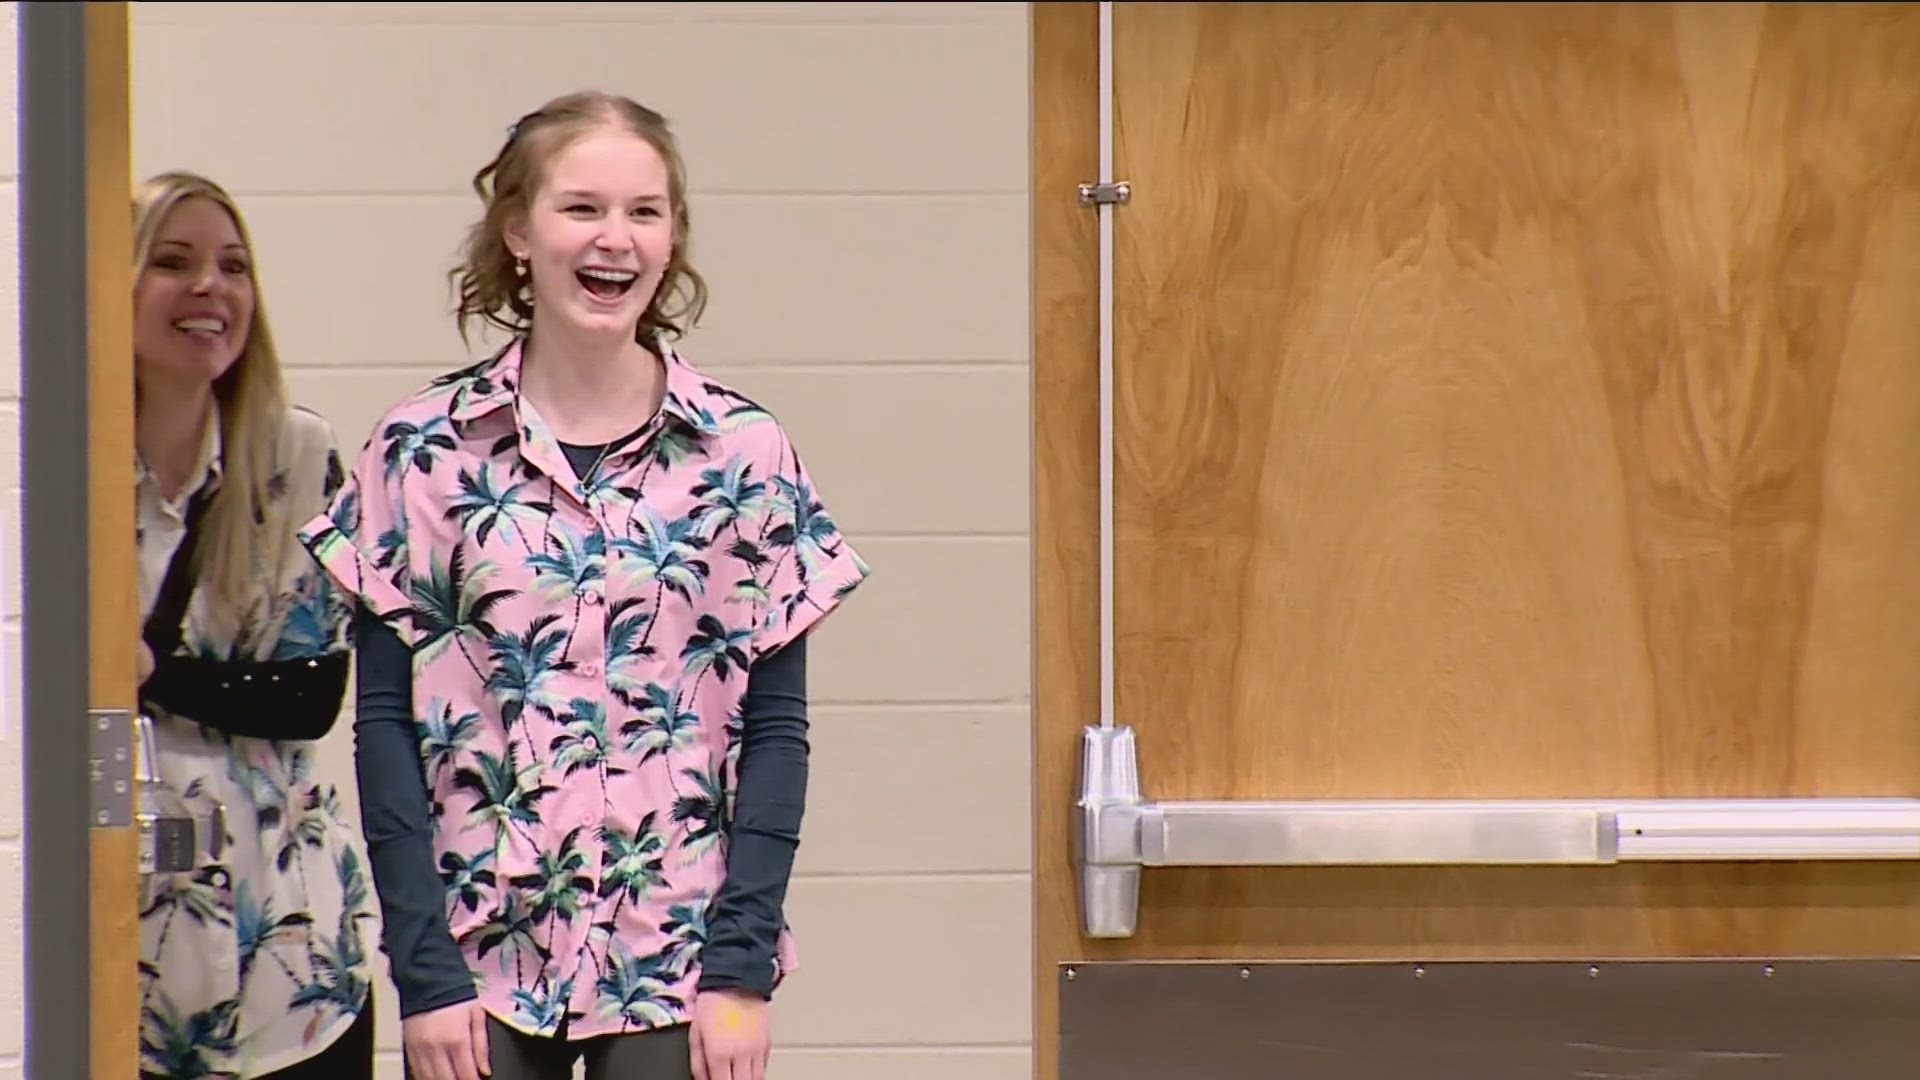 A Bentonville teenager's wish of a Hawaii vacation comes true thanks to Wells Enterprise and Make-a-Wish Mid-South. Watch this video to learn more about her story.